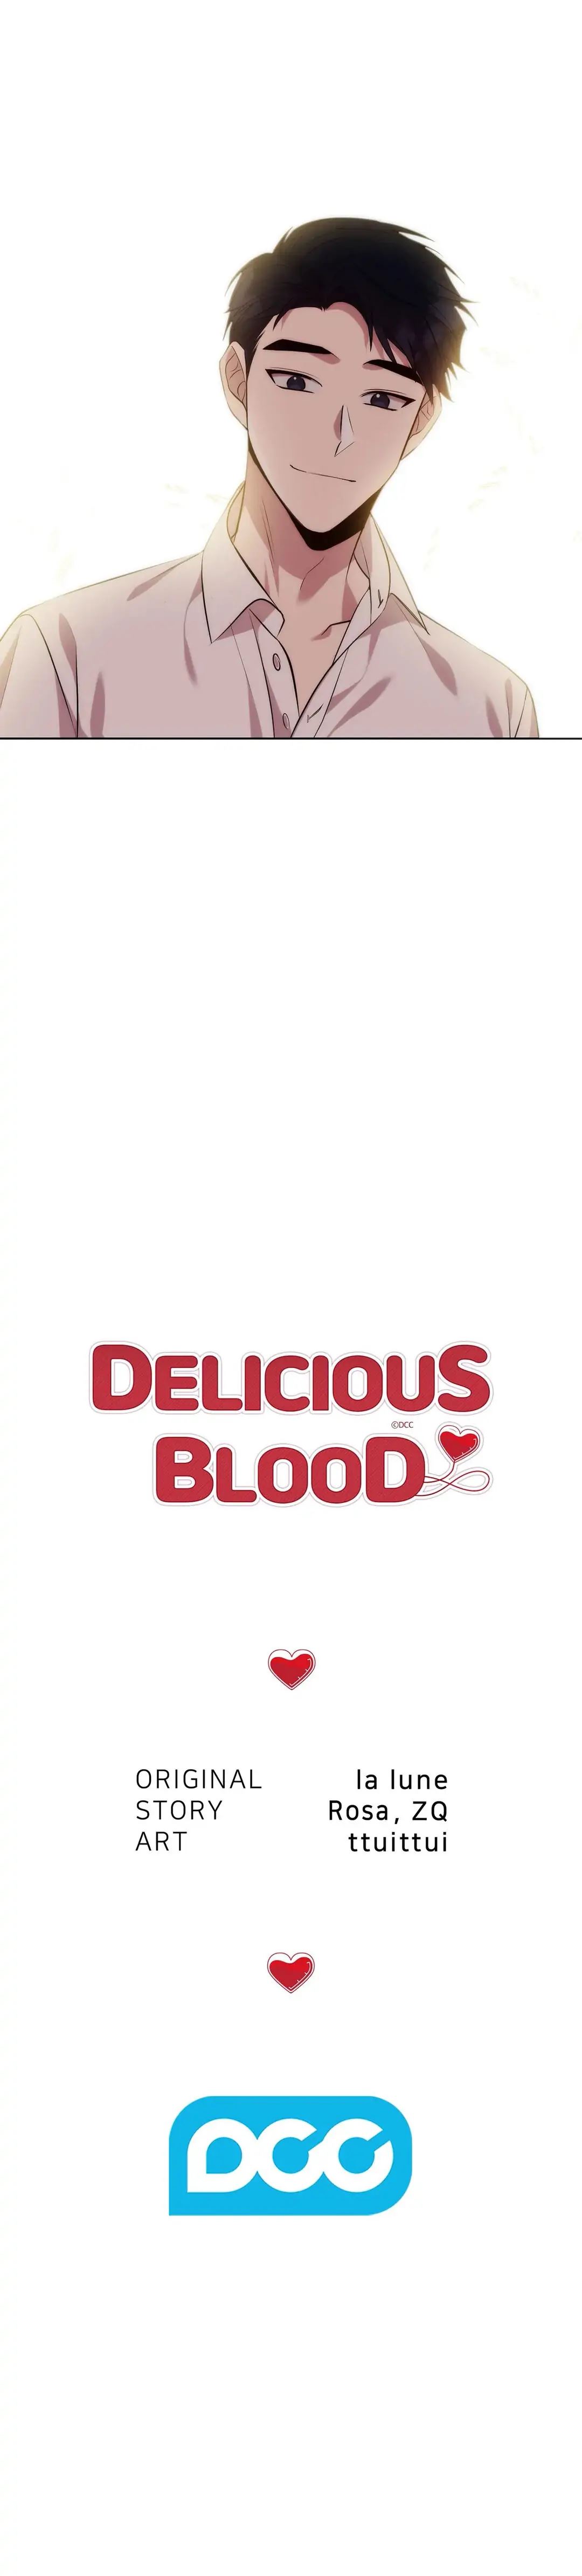 Delicious Blood NEW image